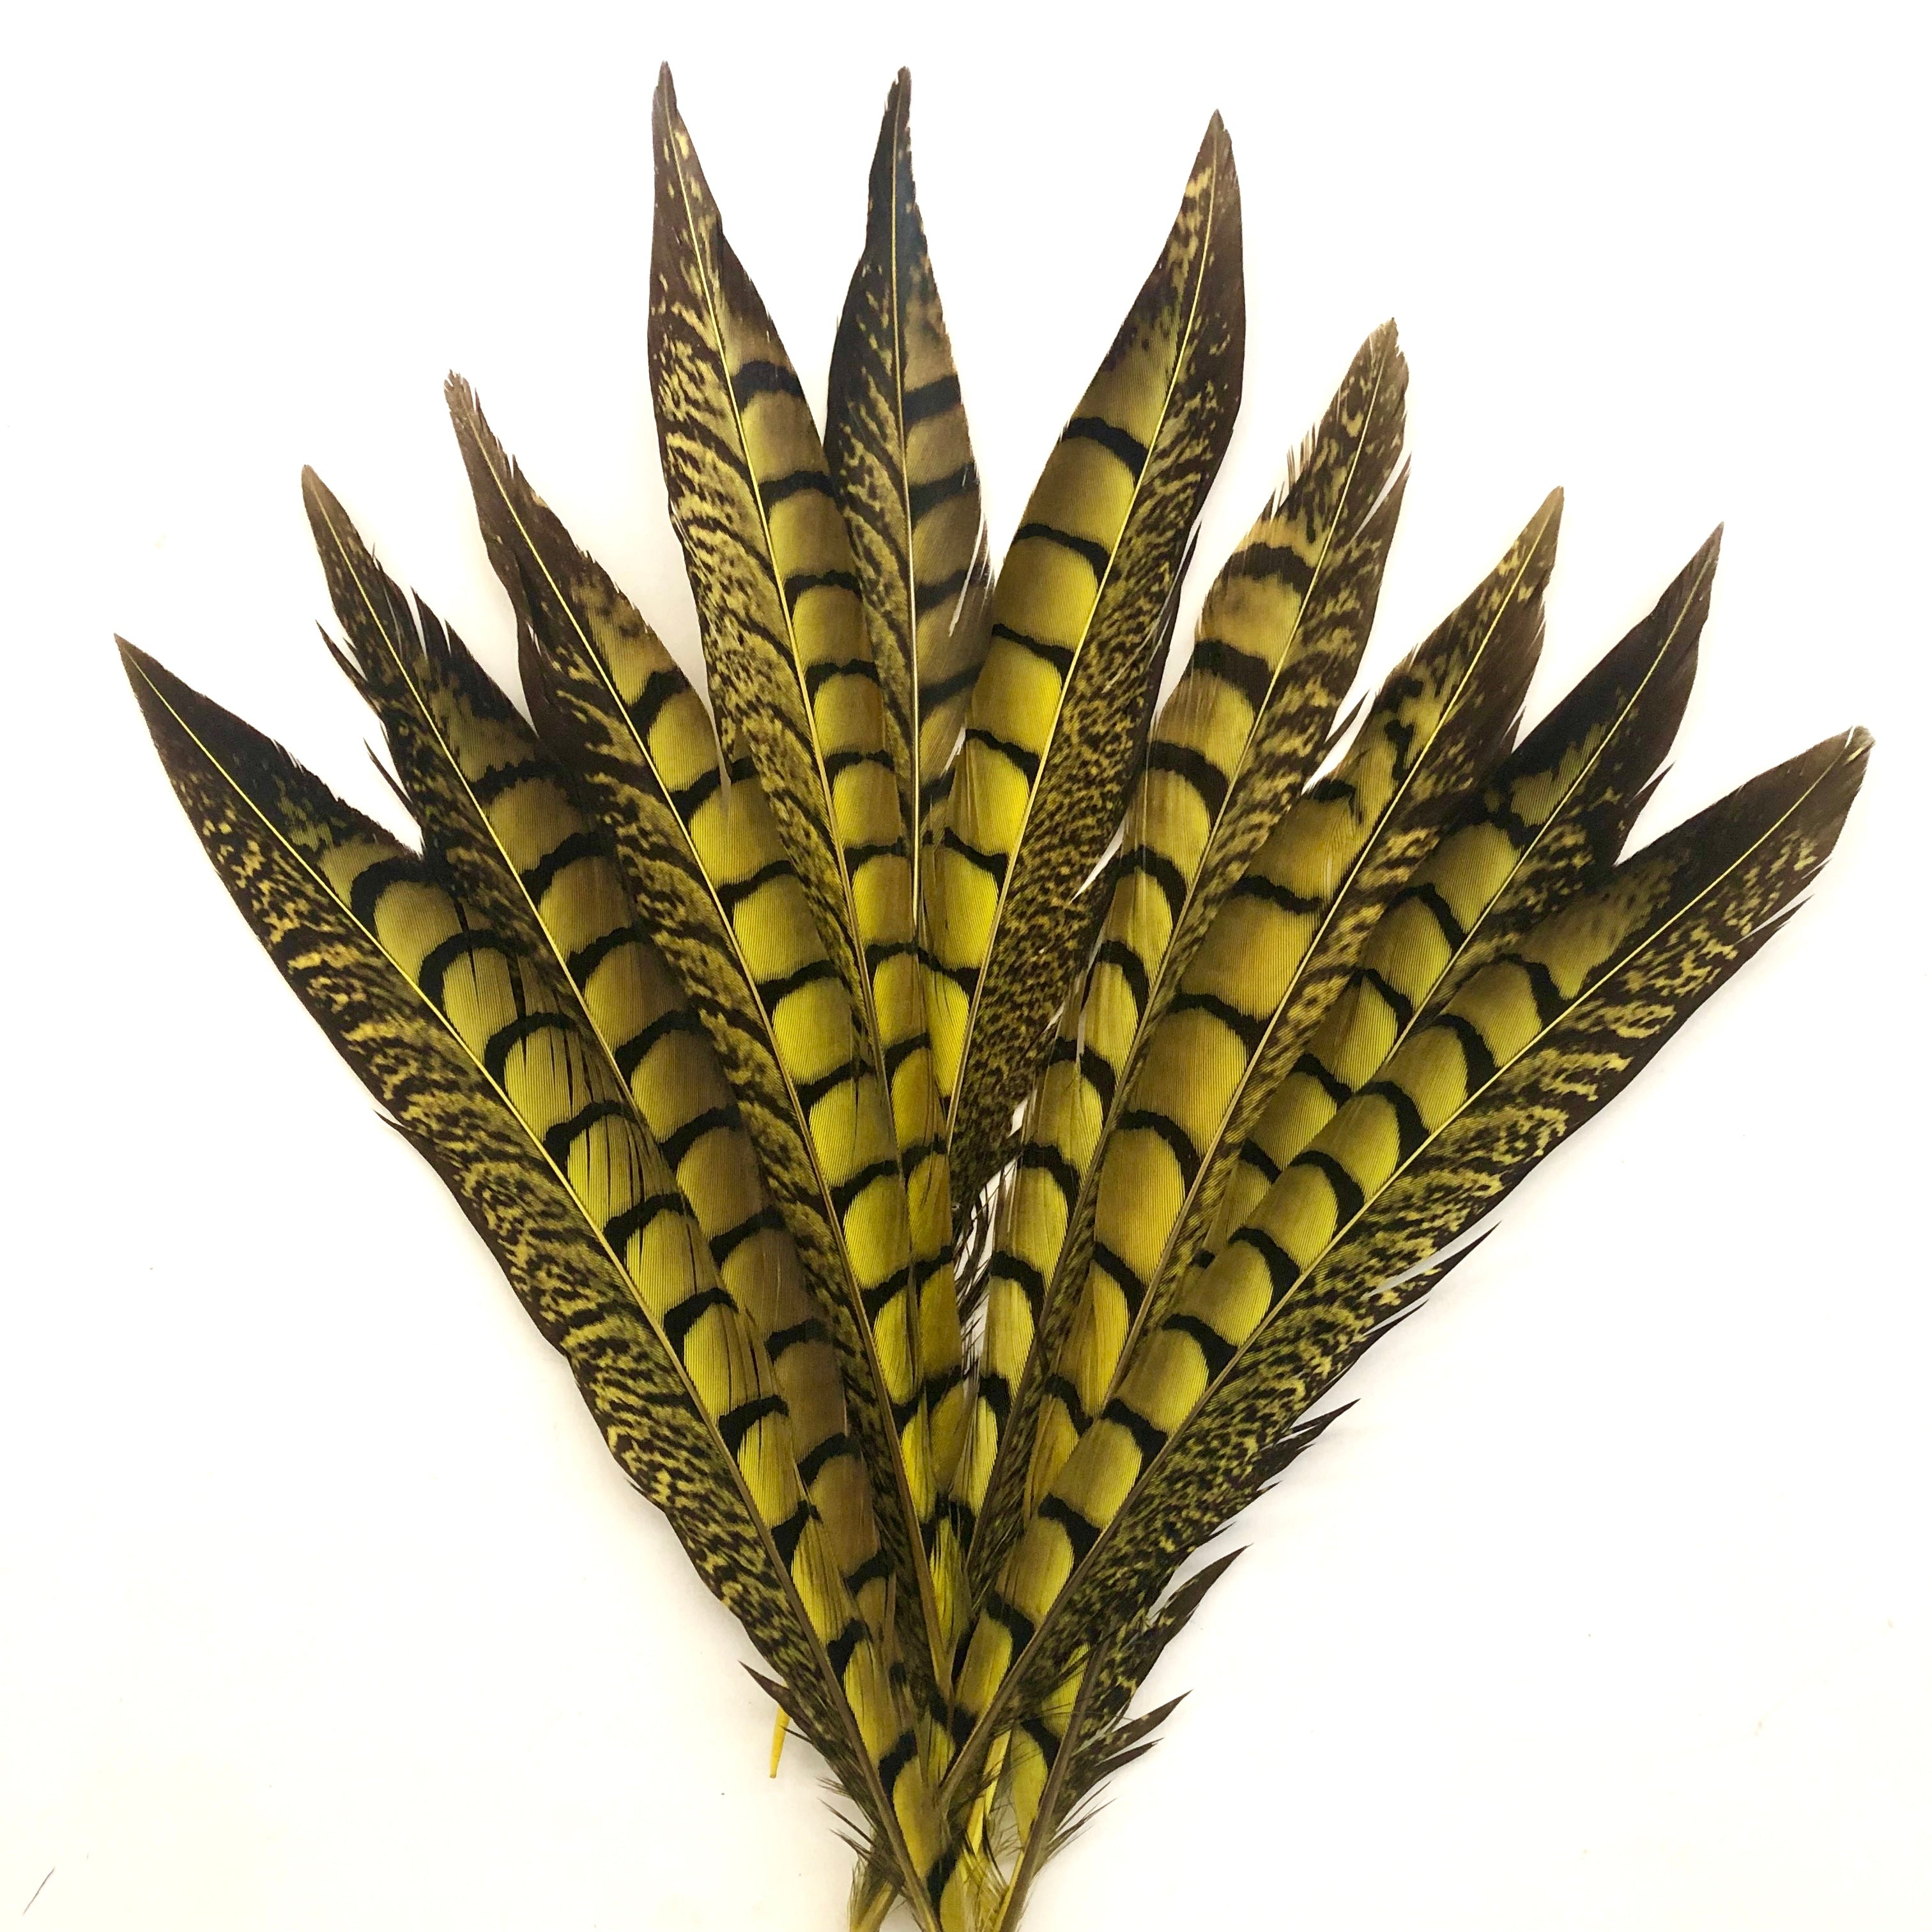 5" to 10" Lady Amherst Pheasant Side Tail Feather x 10 pcs - Yellow